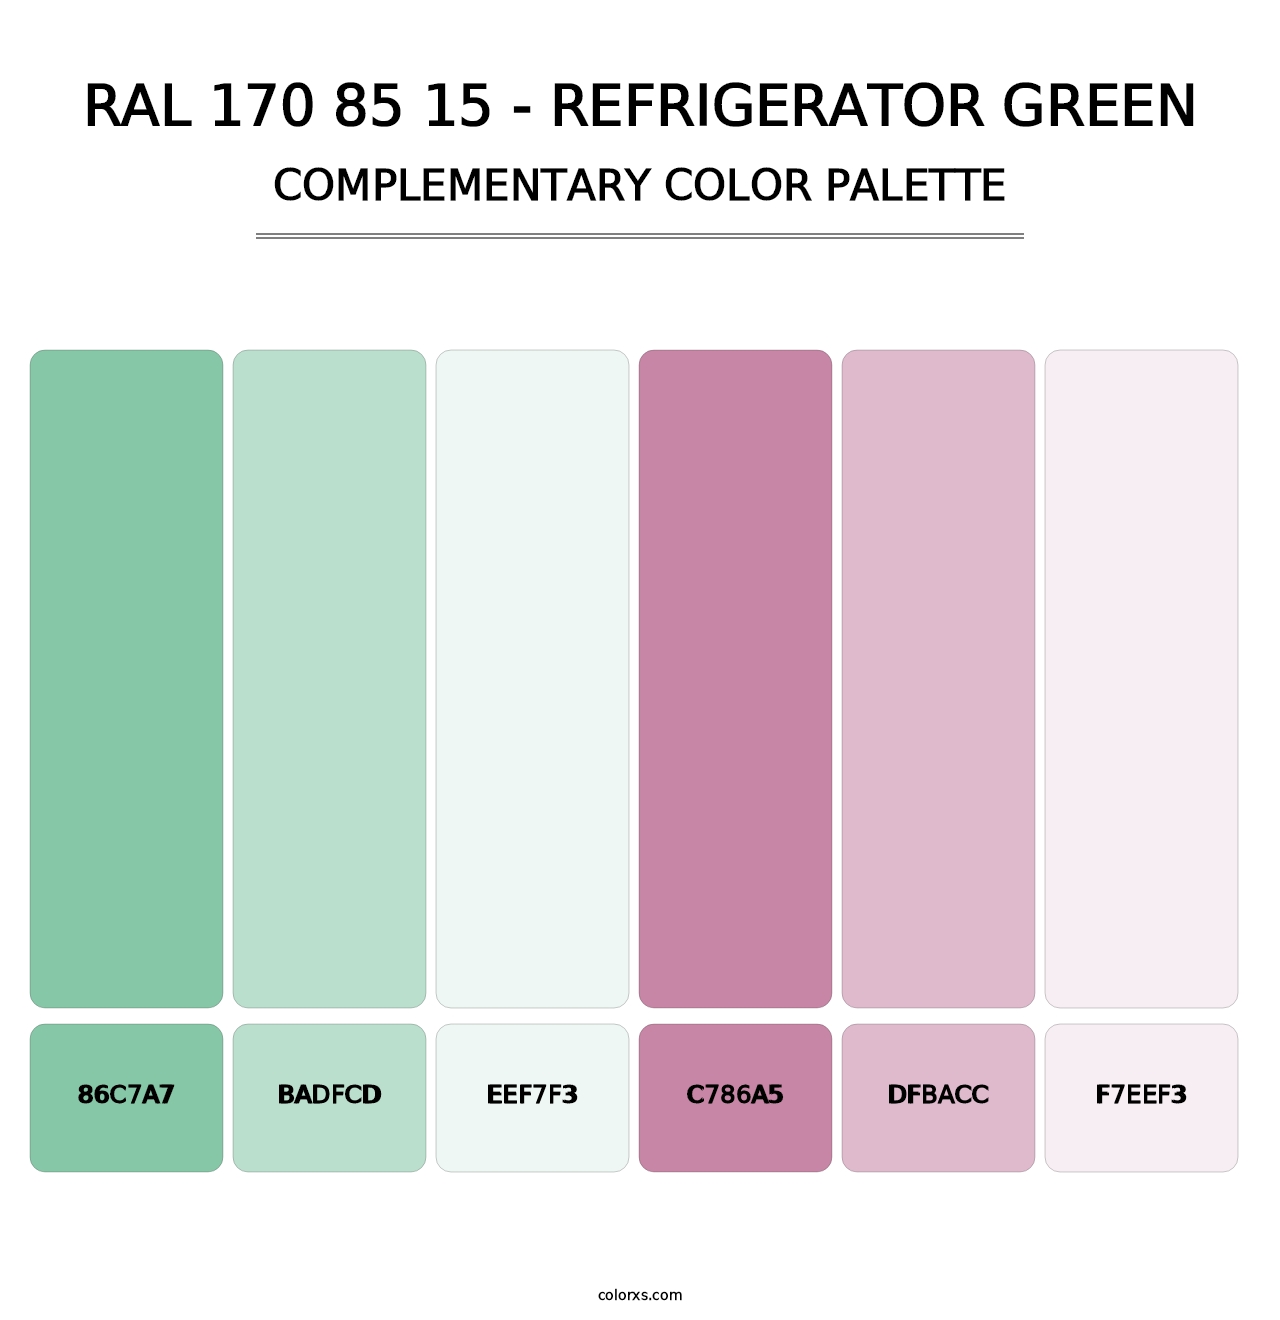 RAL 170 85 15 - Refrigerator Green - Complementary Color Palette